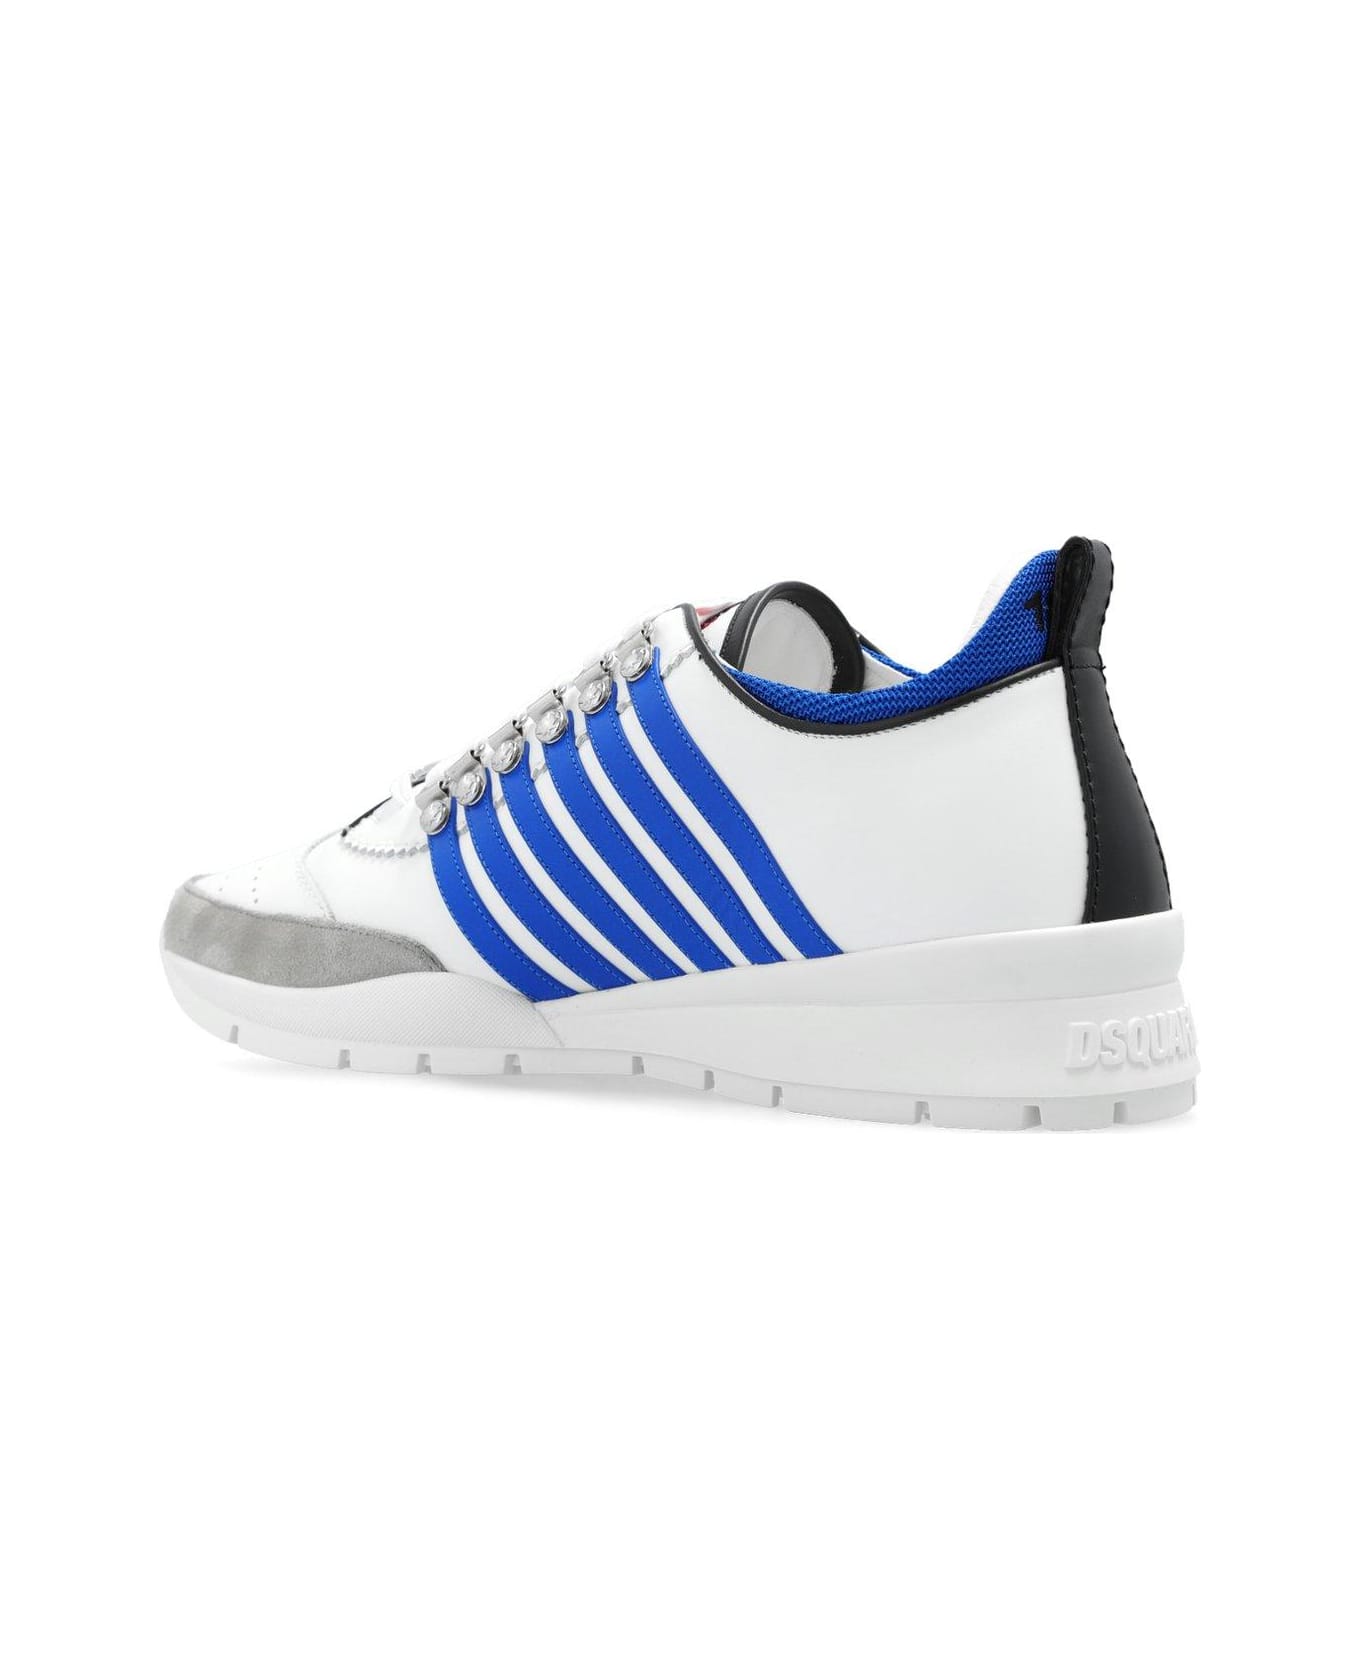 Dsquared2 Legendary Striped Almond Toe Sneakers - Bianco スニーカー